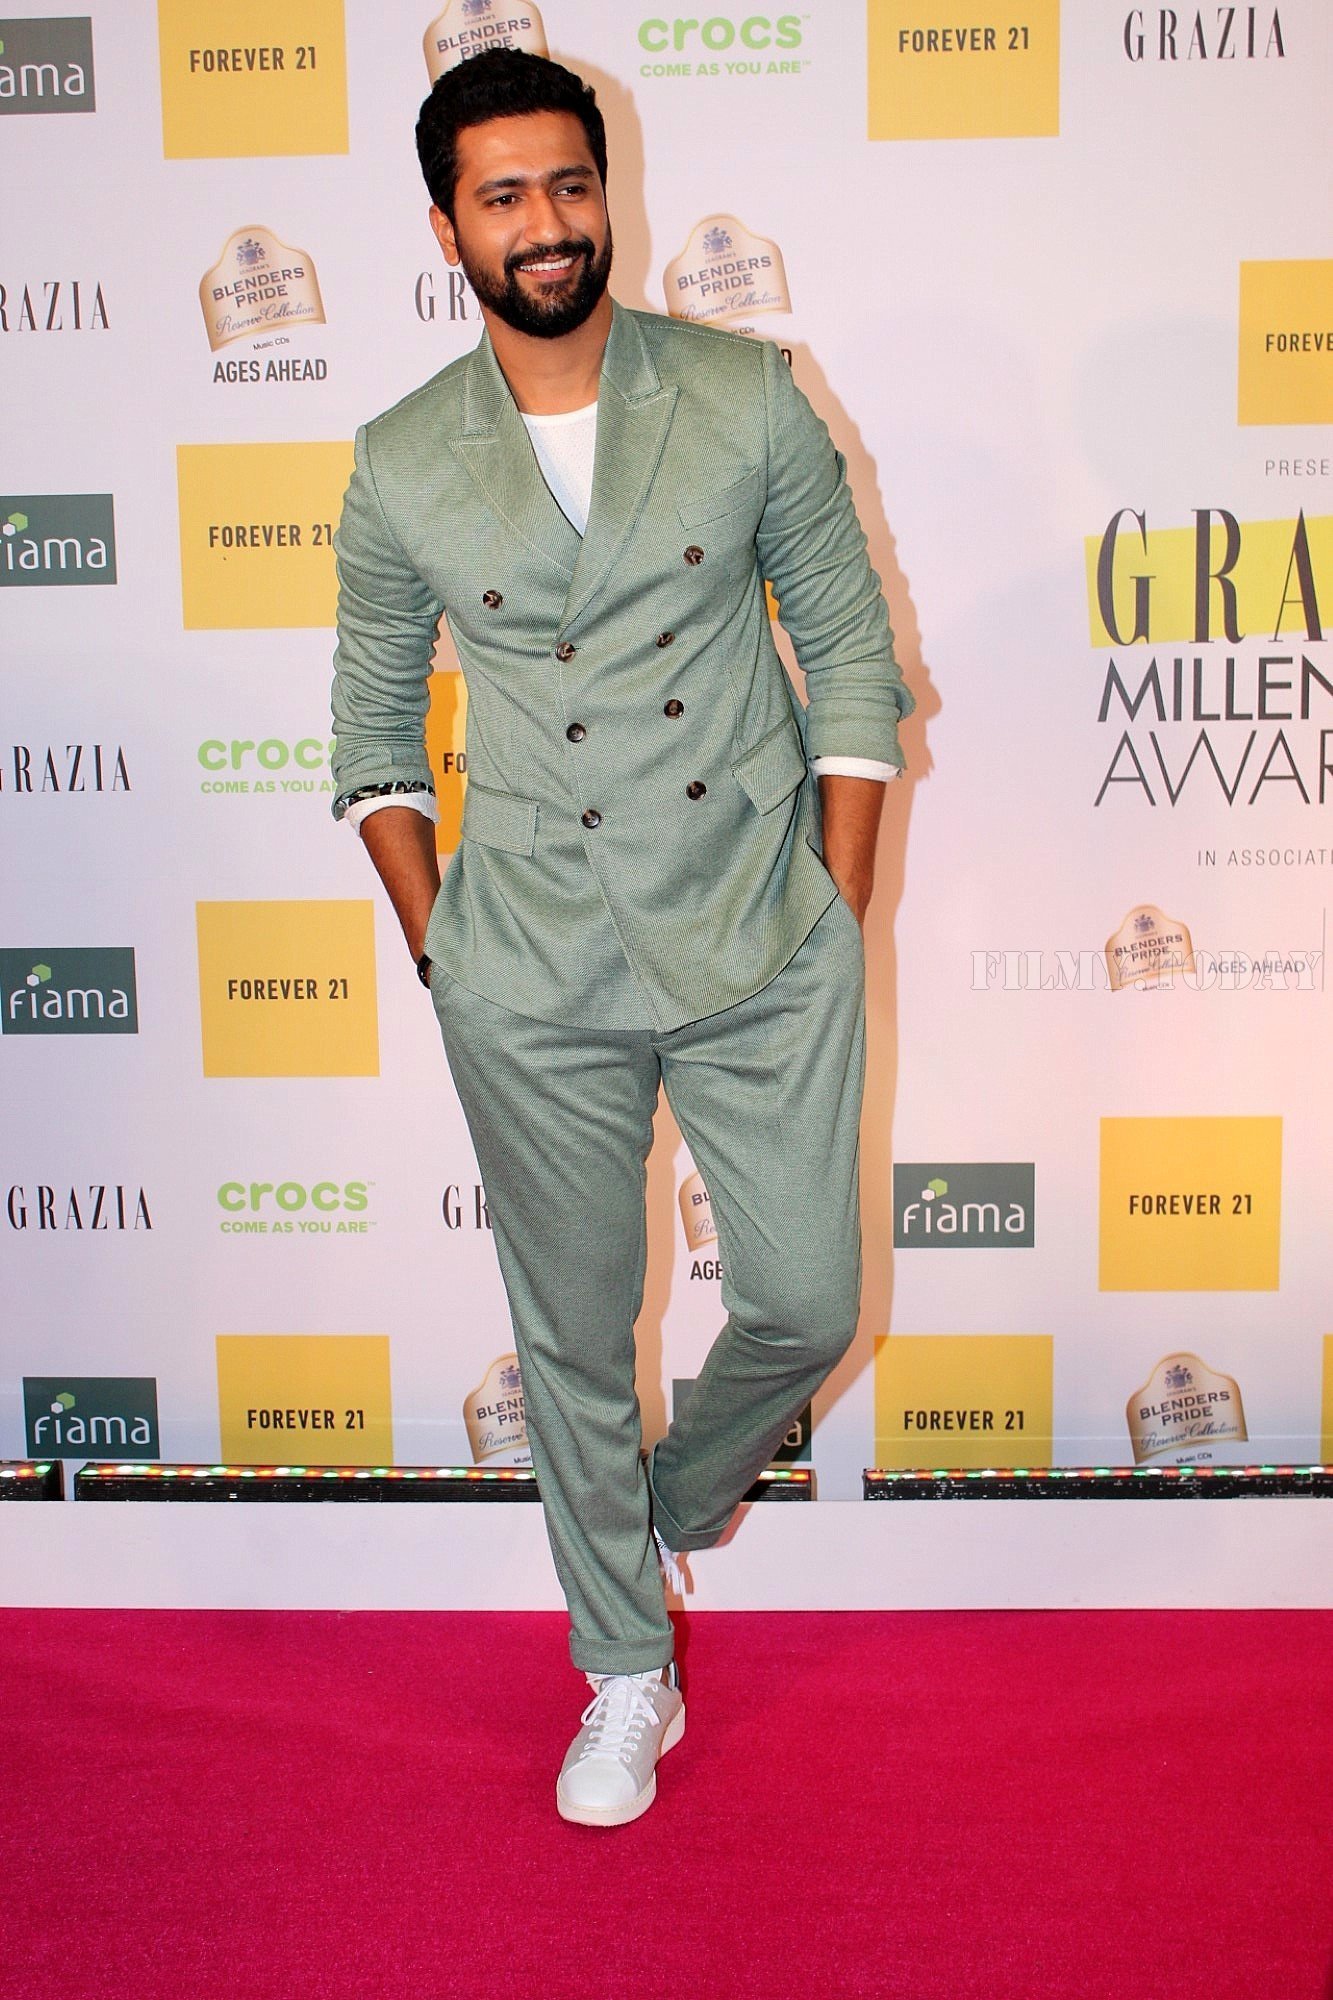 Vicky Kaushal - Photos: Red Carpet Of 1st Edition Of Grazia Millennial Awards 2019 | Picture 1655482